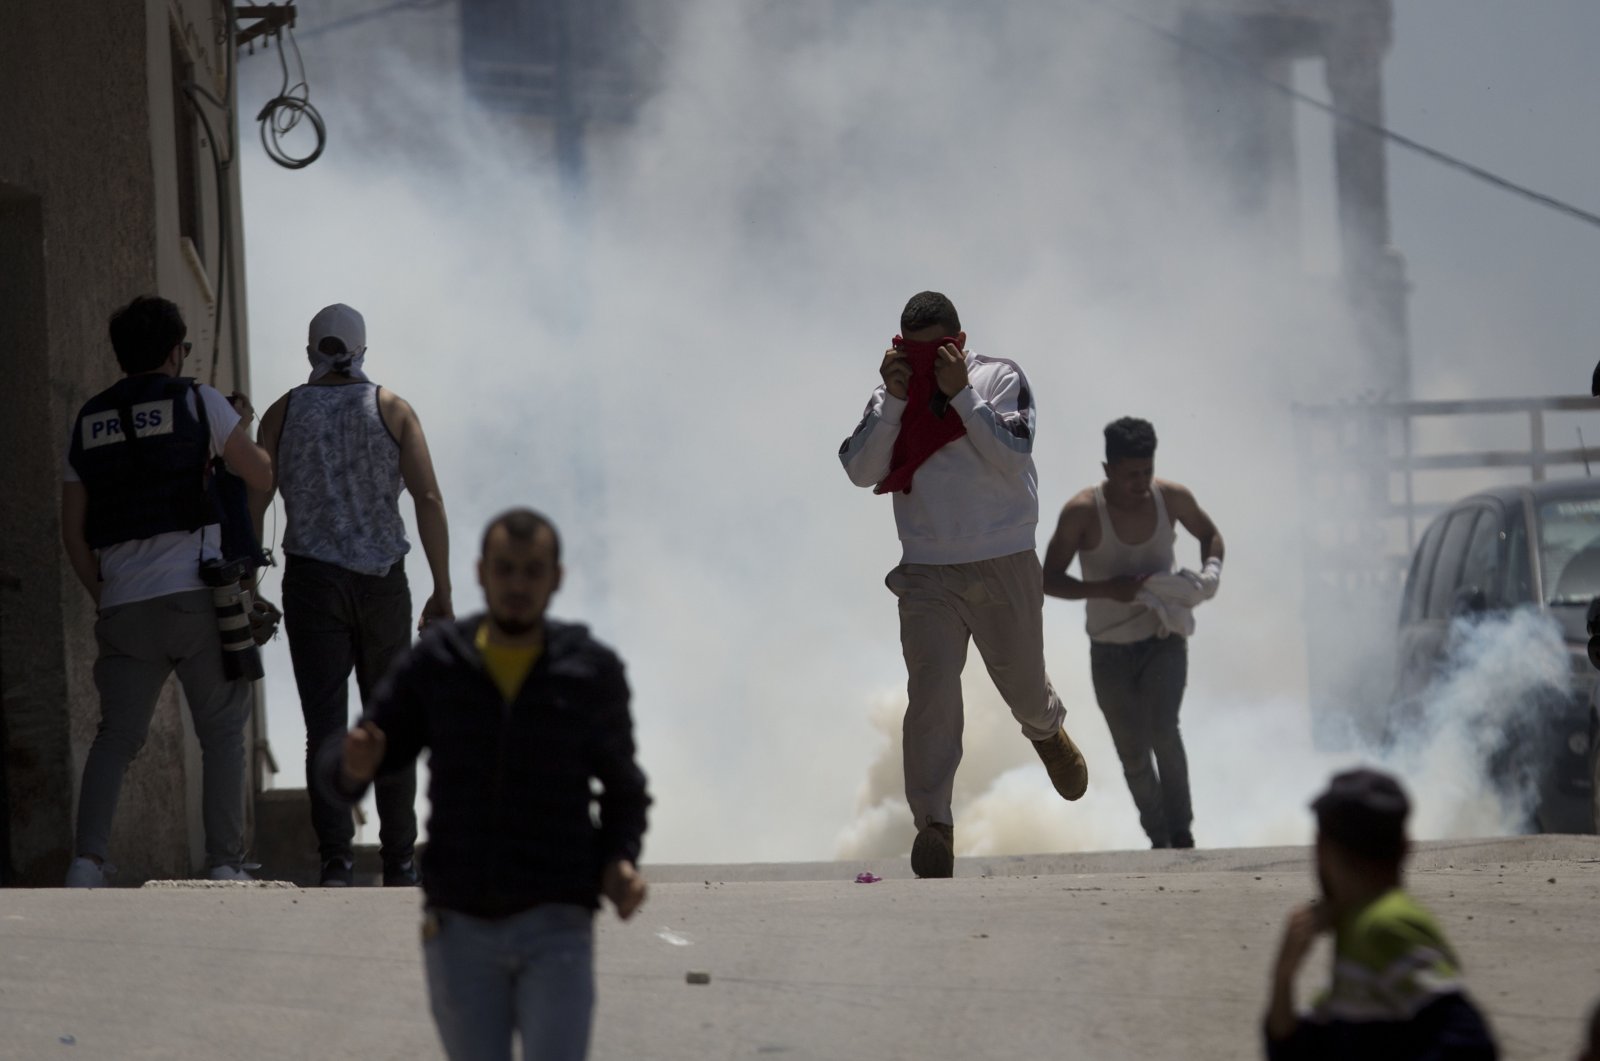 Palestinians run away from tear gas fired by Israeli soldiers in the village of Yabad near the West Bank city of Jenin, May. 12, 2020. (AP Photo)